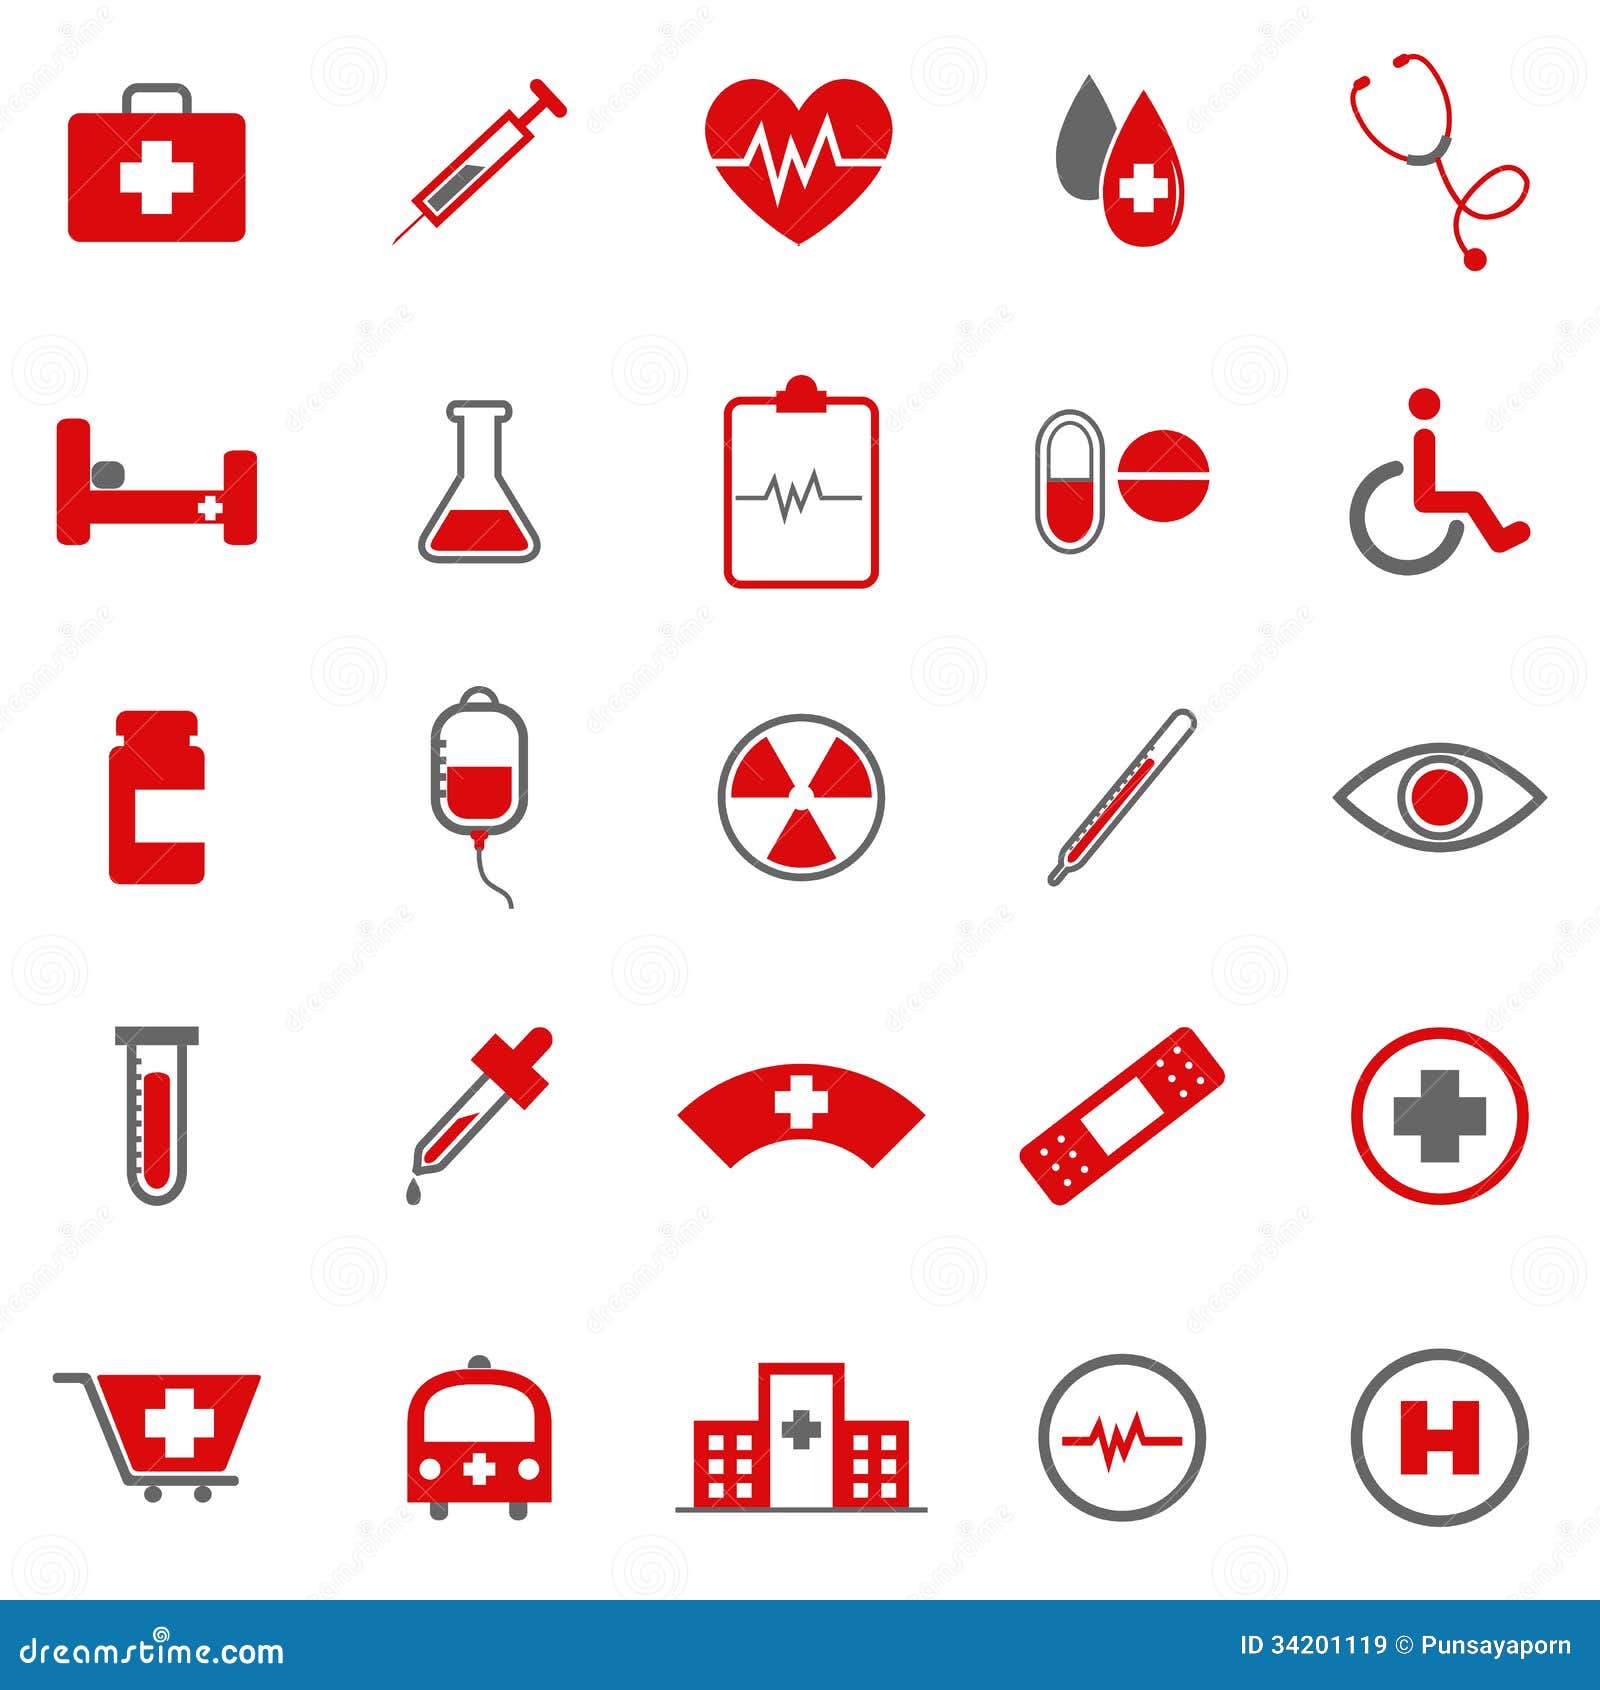 vector free download medical - photo #30